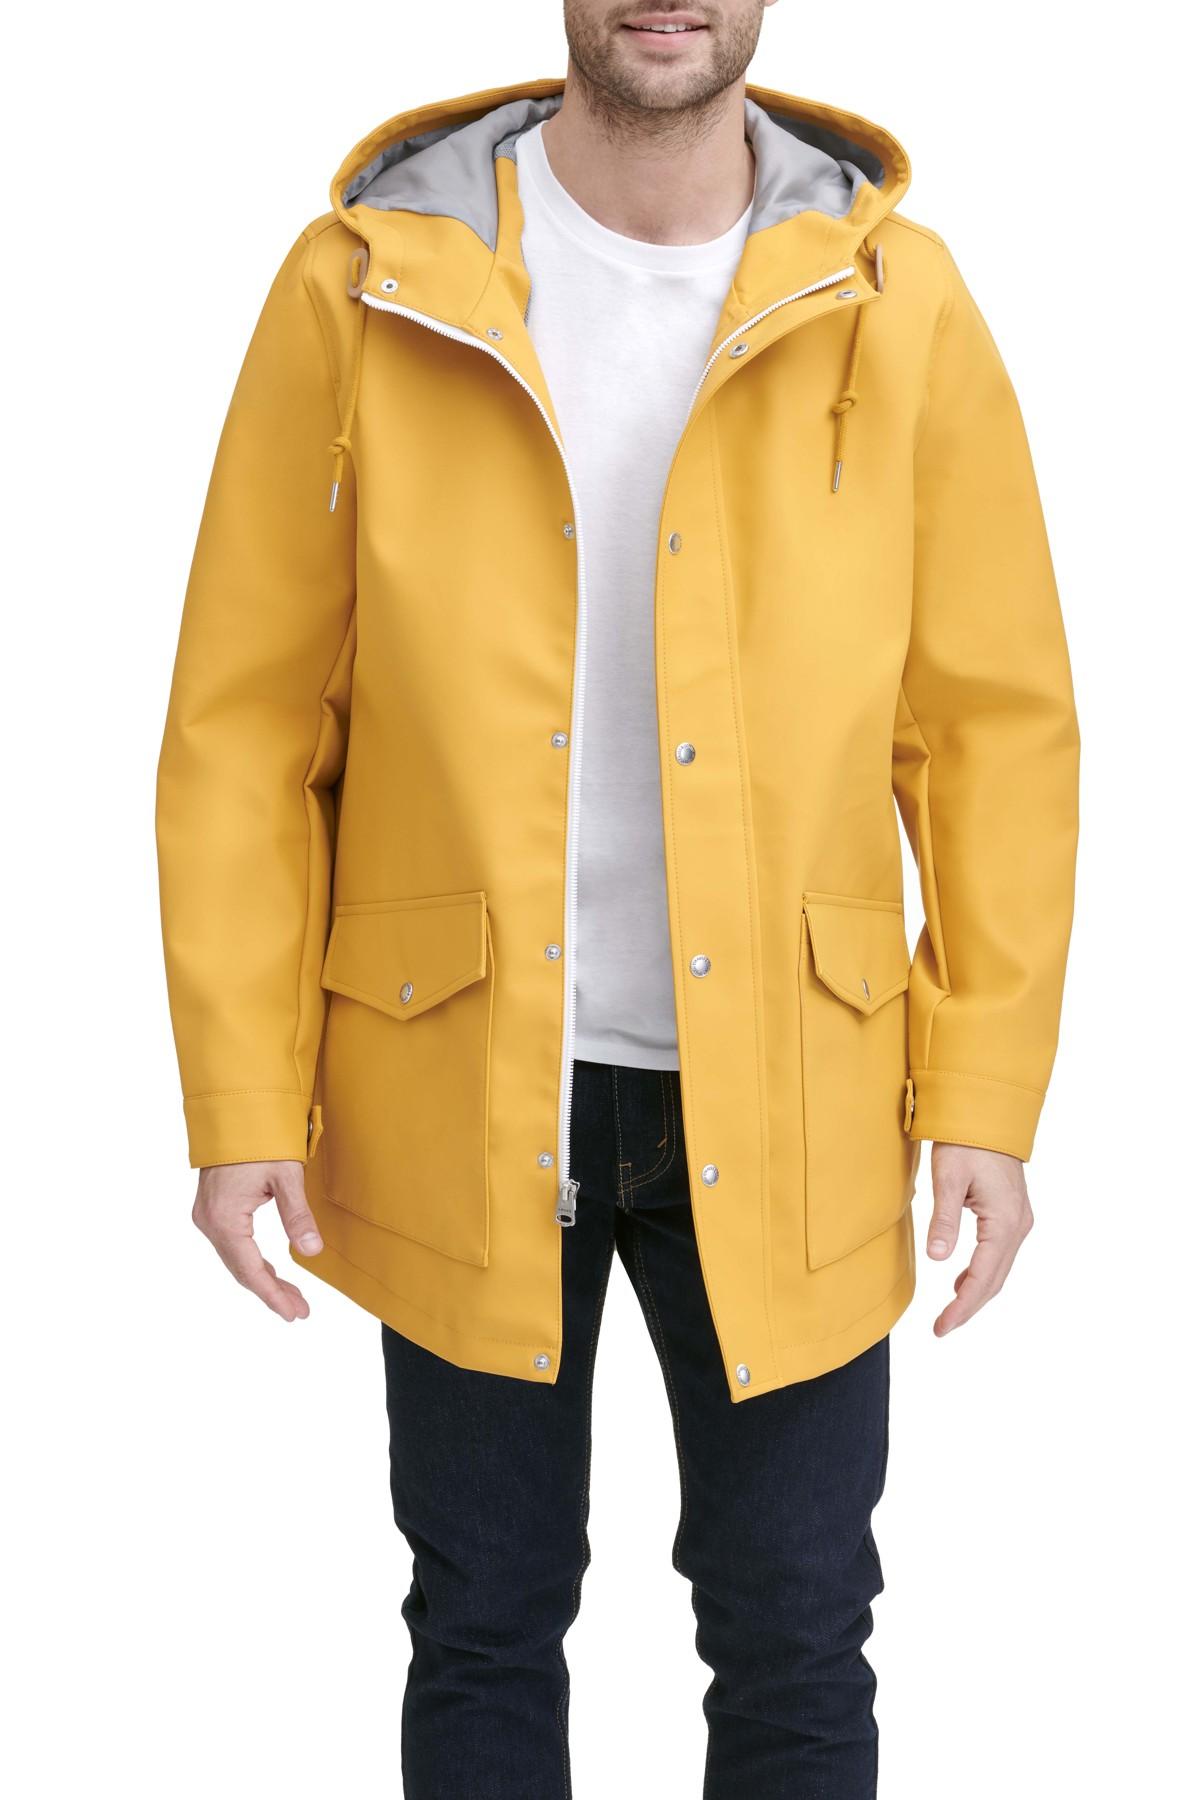 Levi's Synthetic Rainy Days Hooded Jacket in Yellow for Men - Lyst